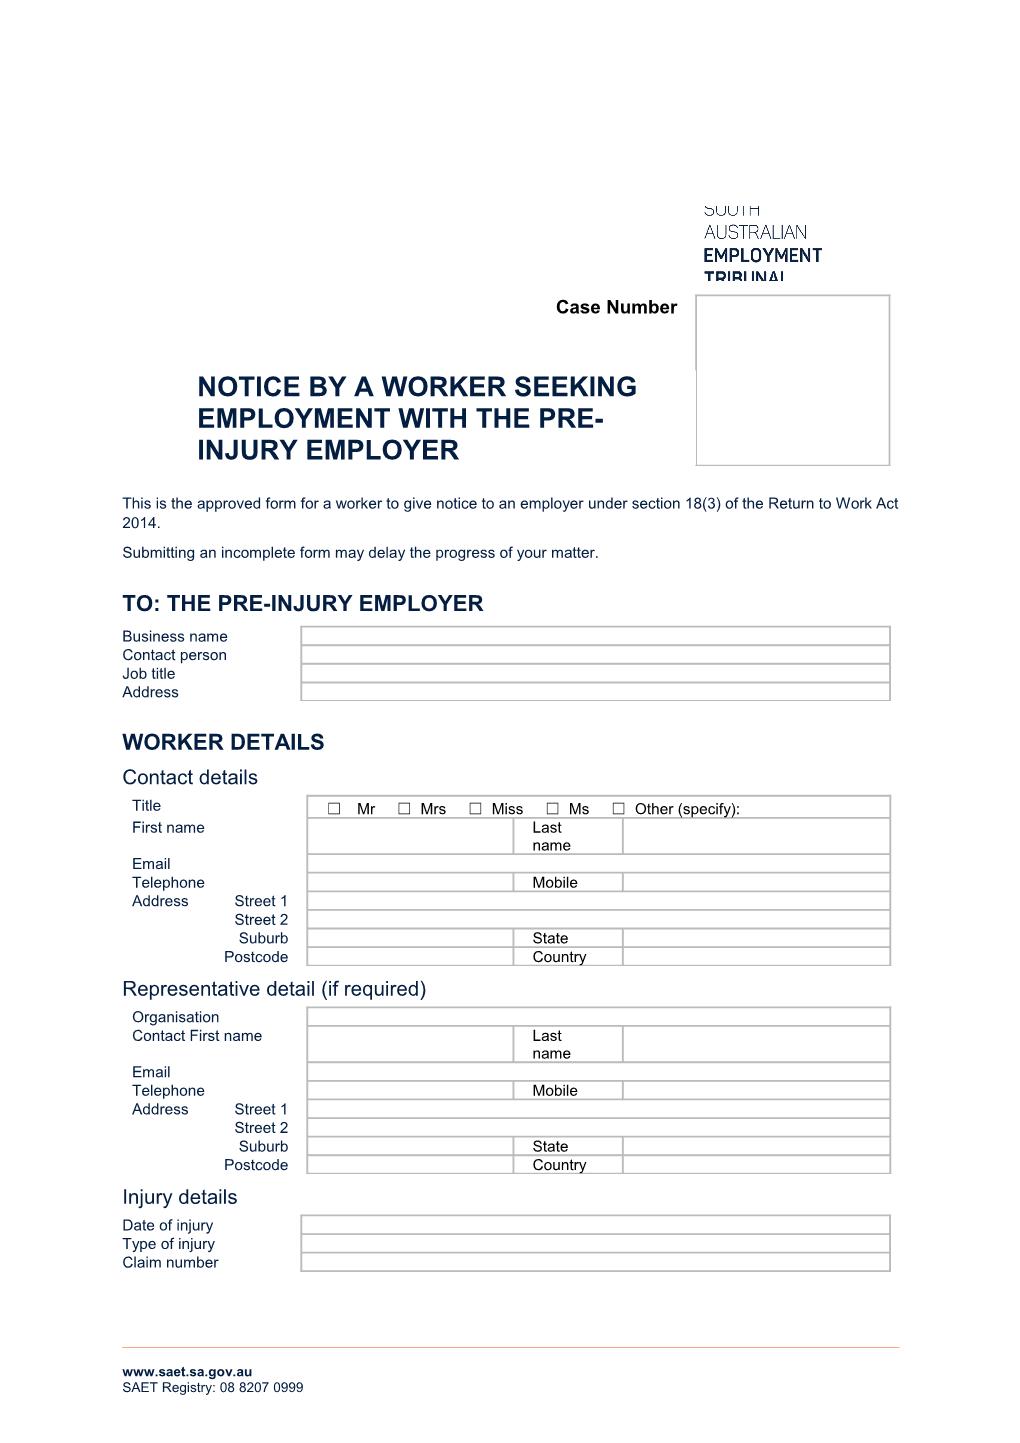 Notice by a Worker Seeking Employment with the Pre-Injury Employer